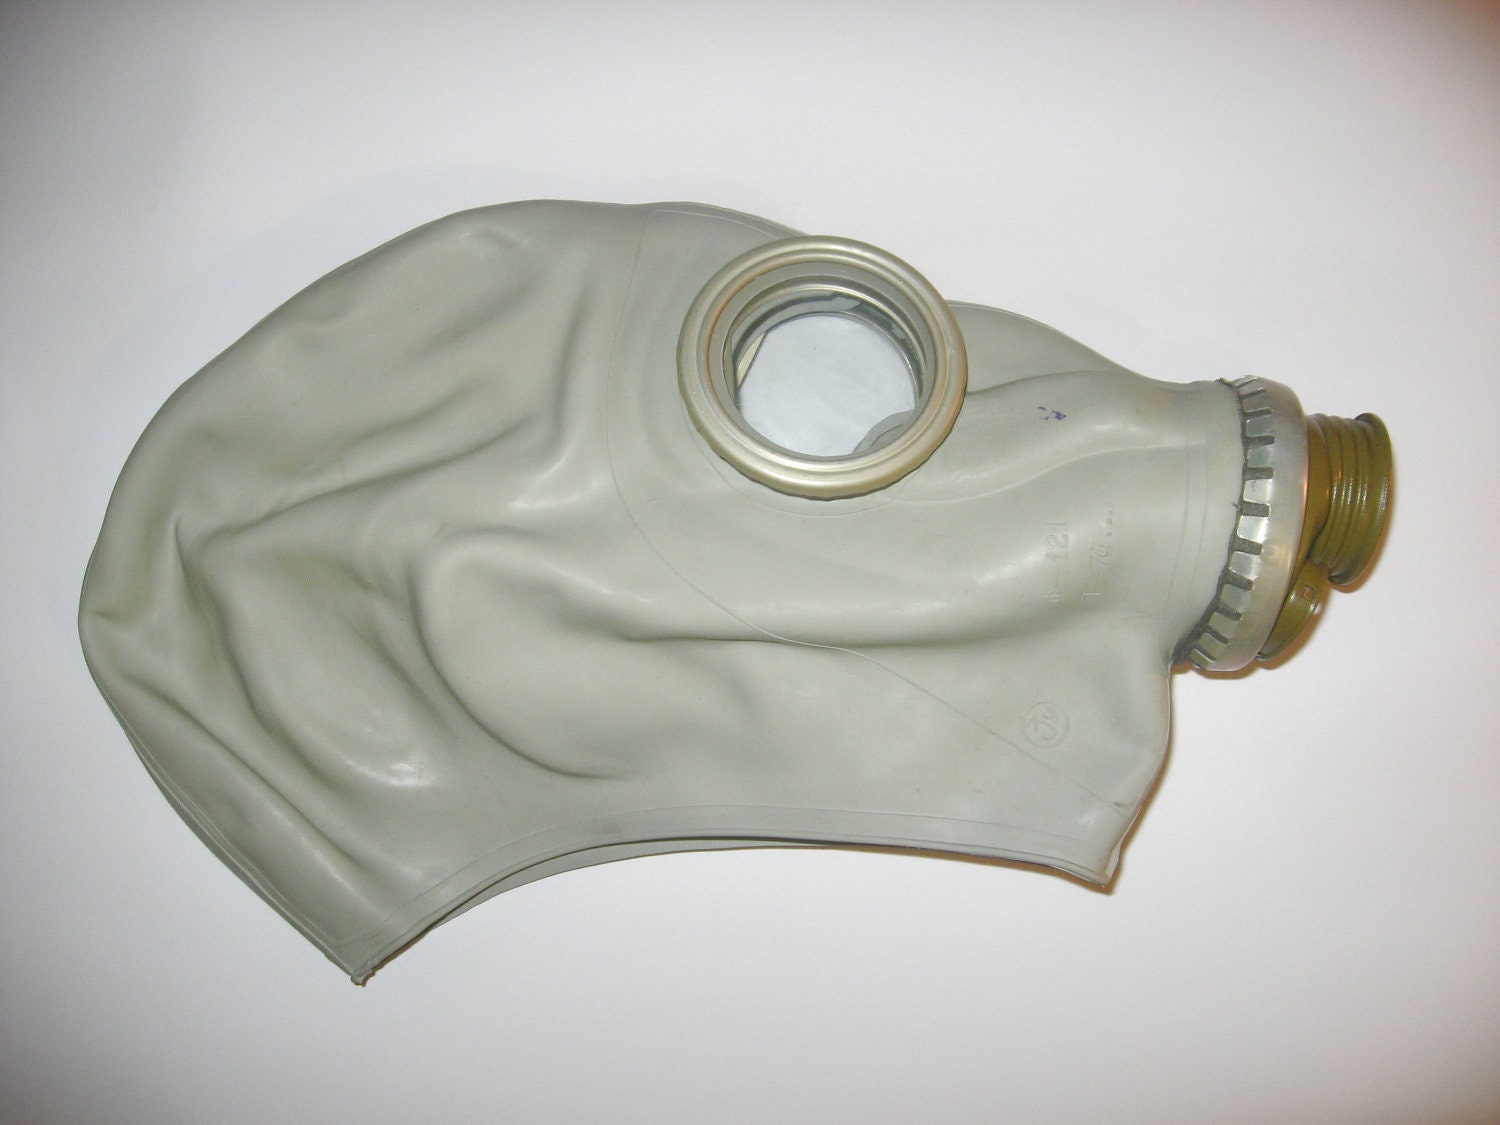 Vintage GP-5 Gas Mask is a Soviet-made ,Brand New, cyber mask, cyber goth respirator